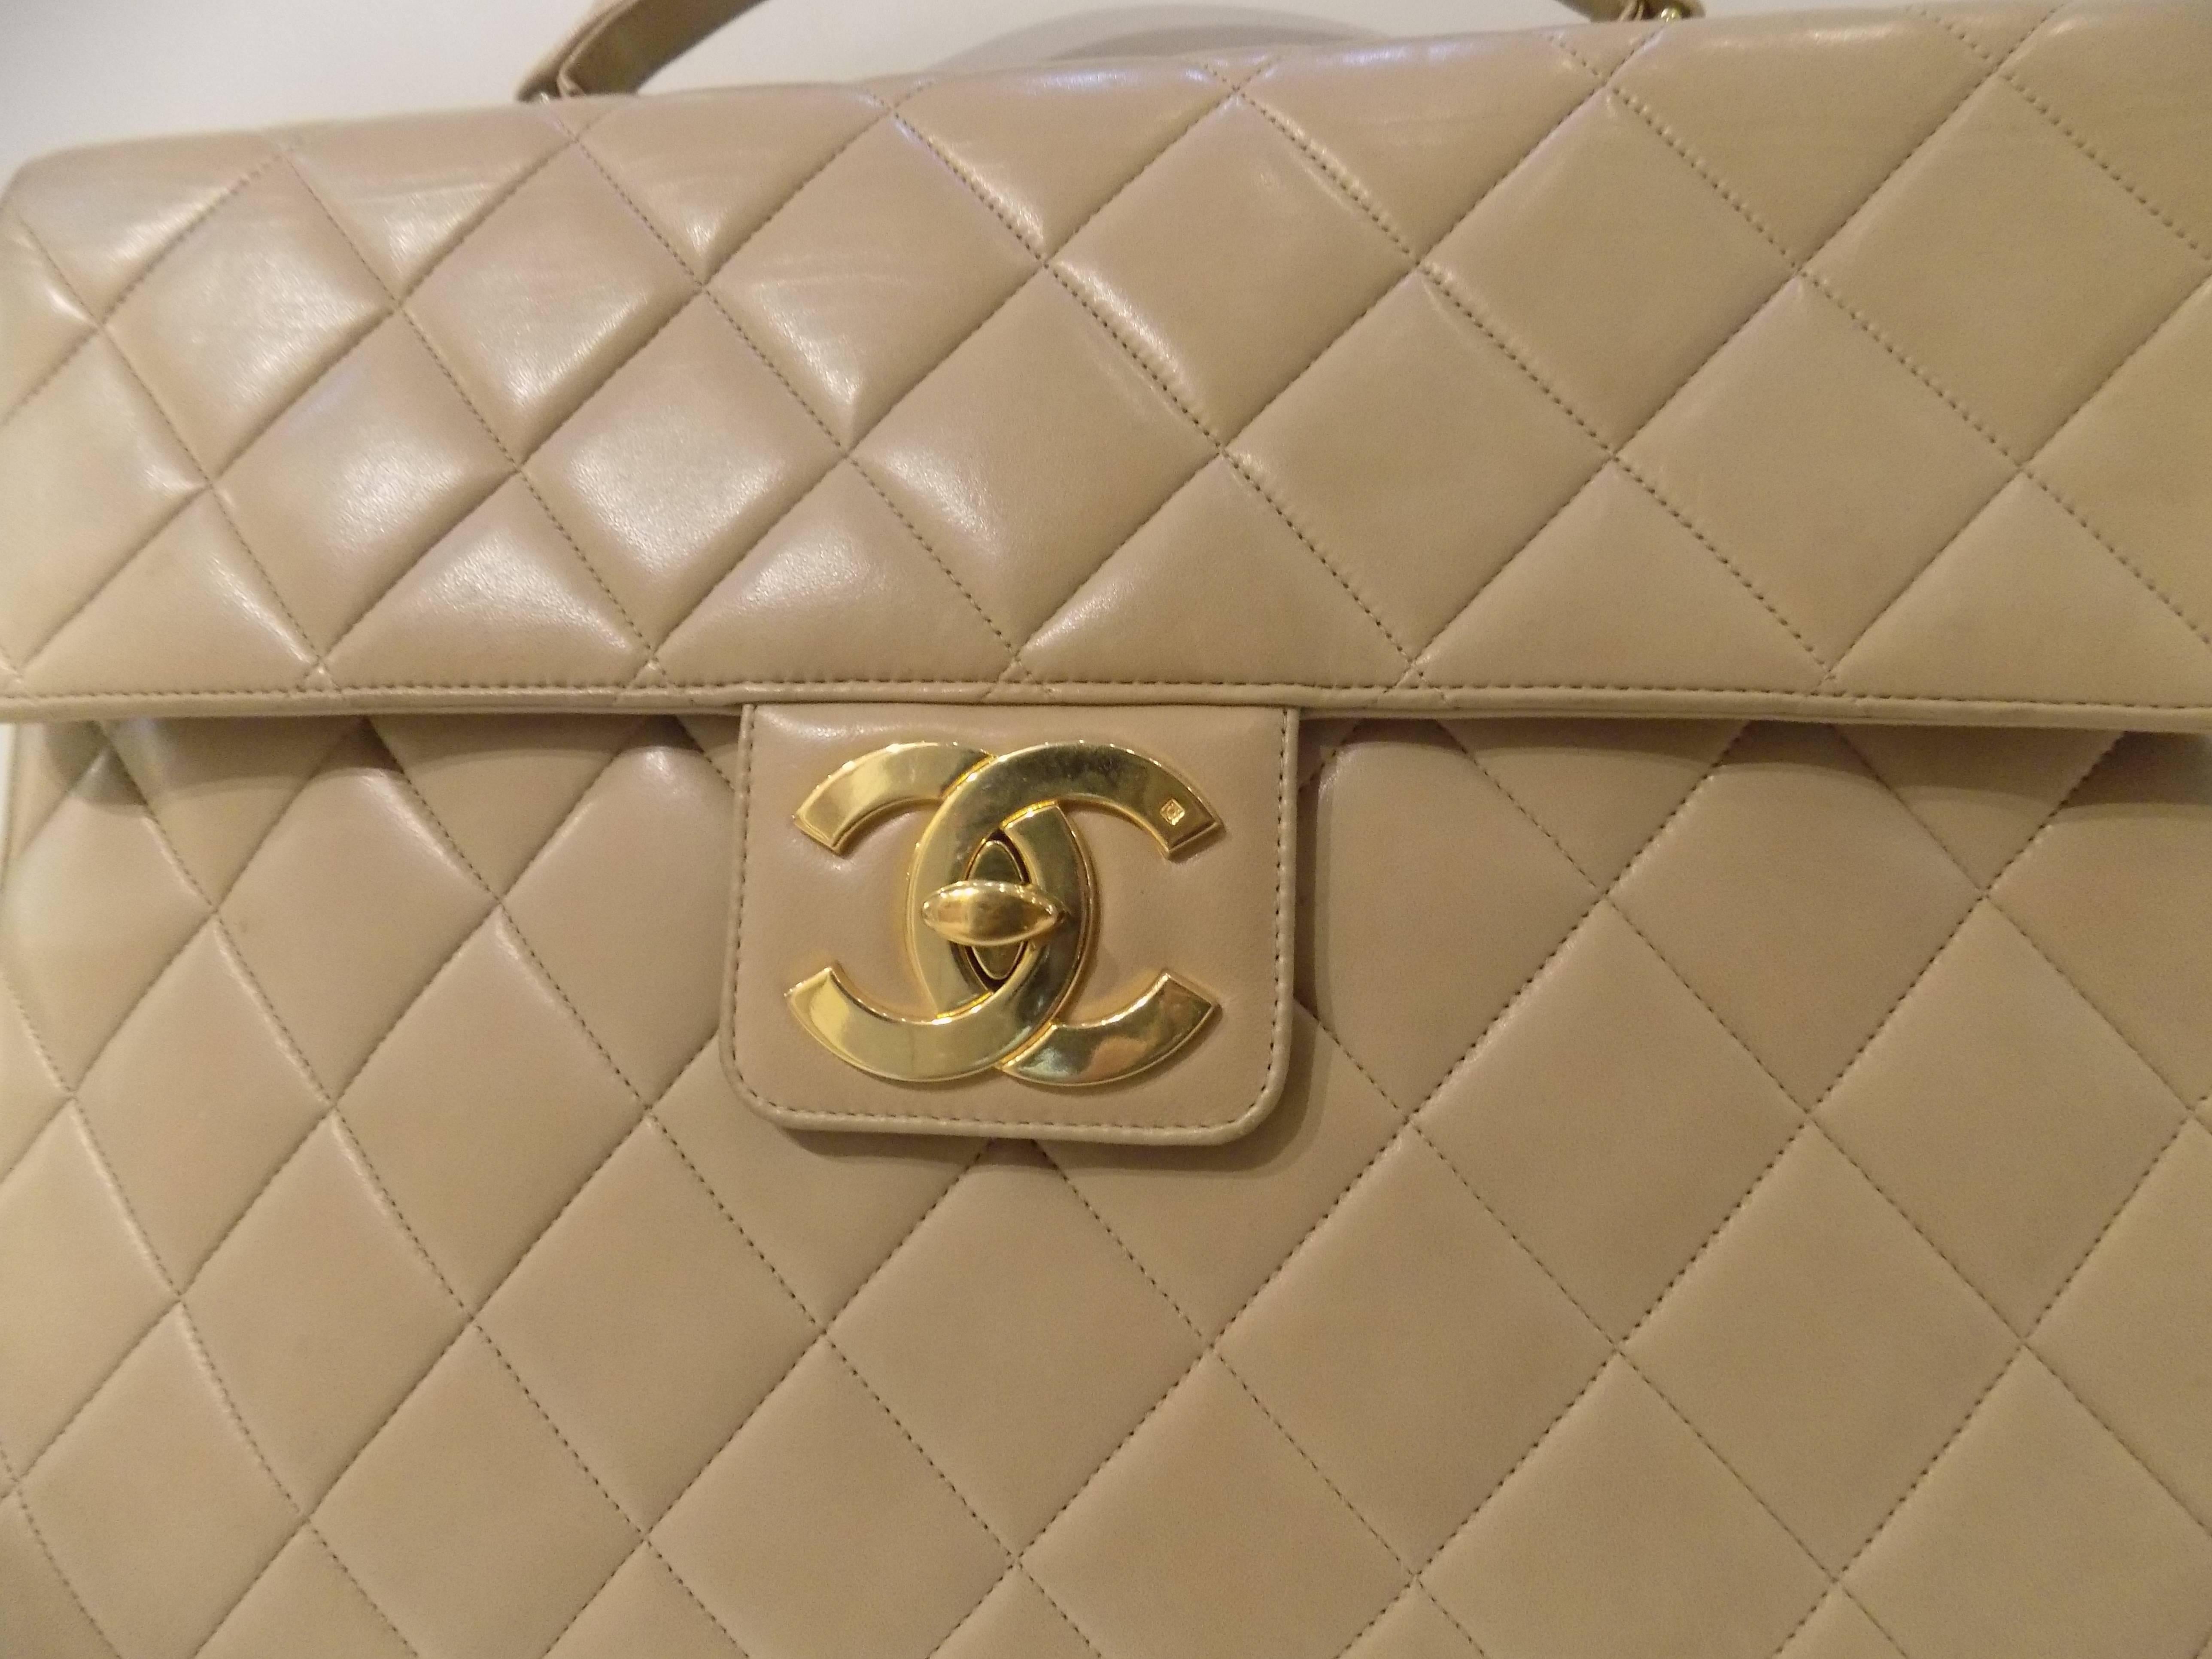 1990s Chanel beije lambskin bag
Beije caviar leather quilted briefcase from Chanel Vintage featuring a gold-tone logo plaque, a back slip pocket, foldover top with twist-lock closure, an internal zipped pocket, an internal slip pocket, an internal